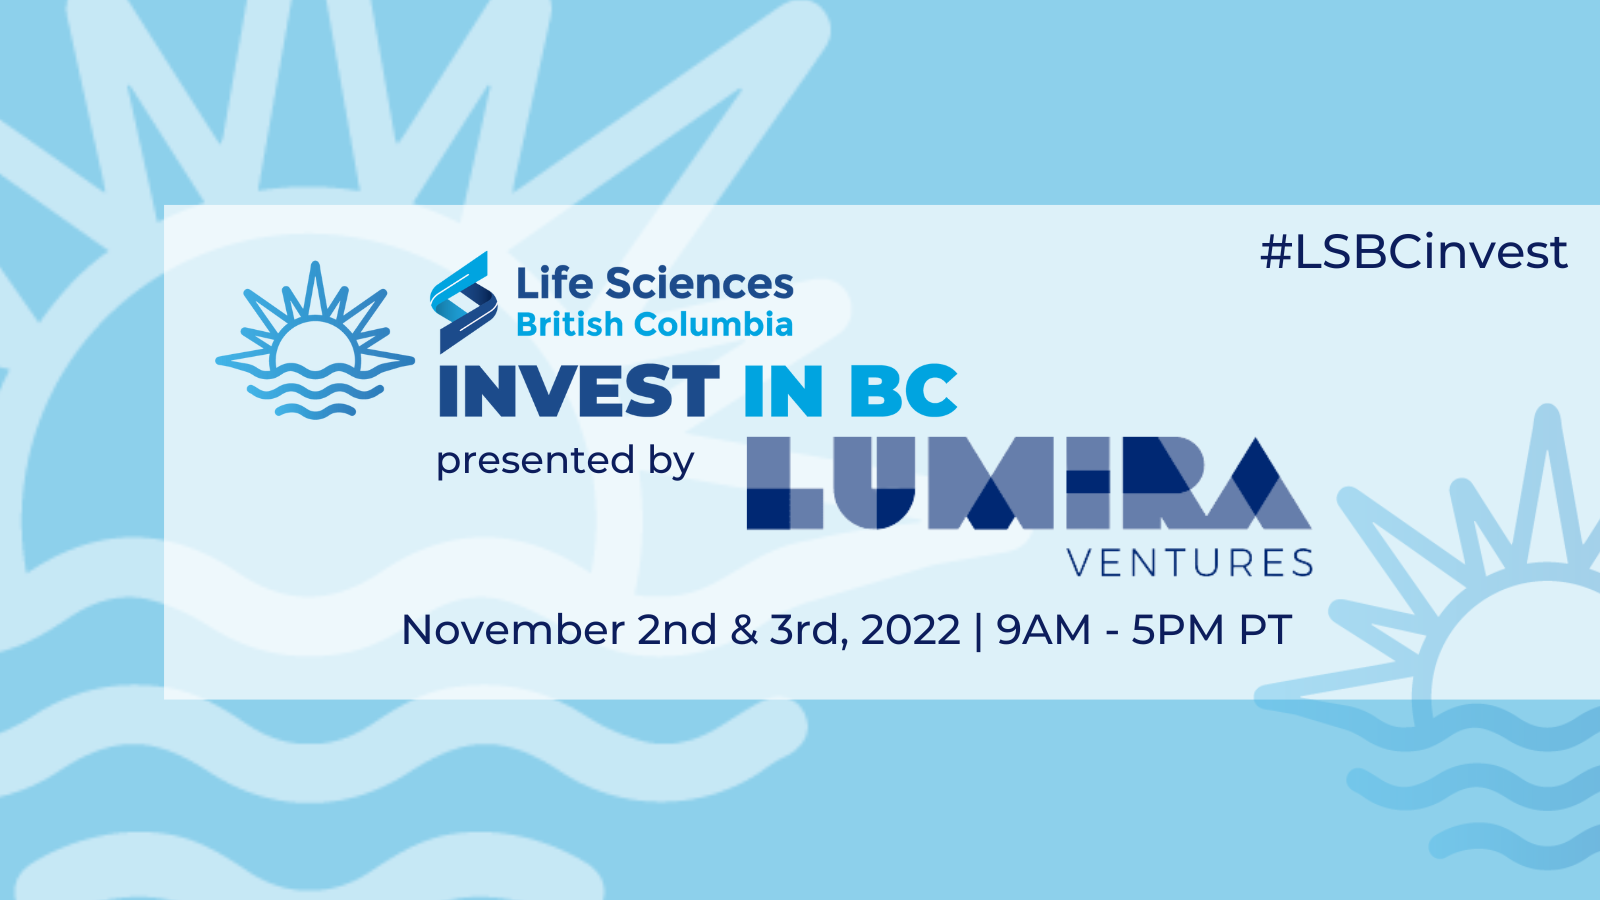 Graphic announcing LSBC's Invest in BC presented by Lumira Ventures event, happening November 2nd & 3rd, 9:00 AM - 5:00 PM PT